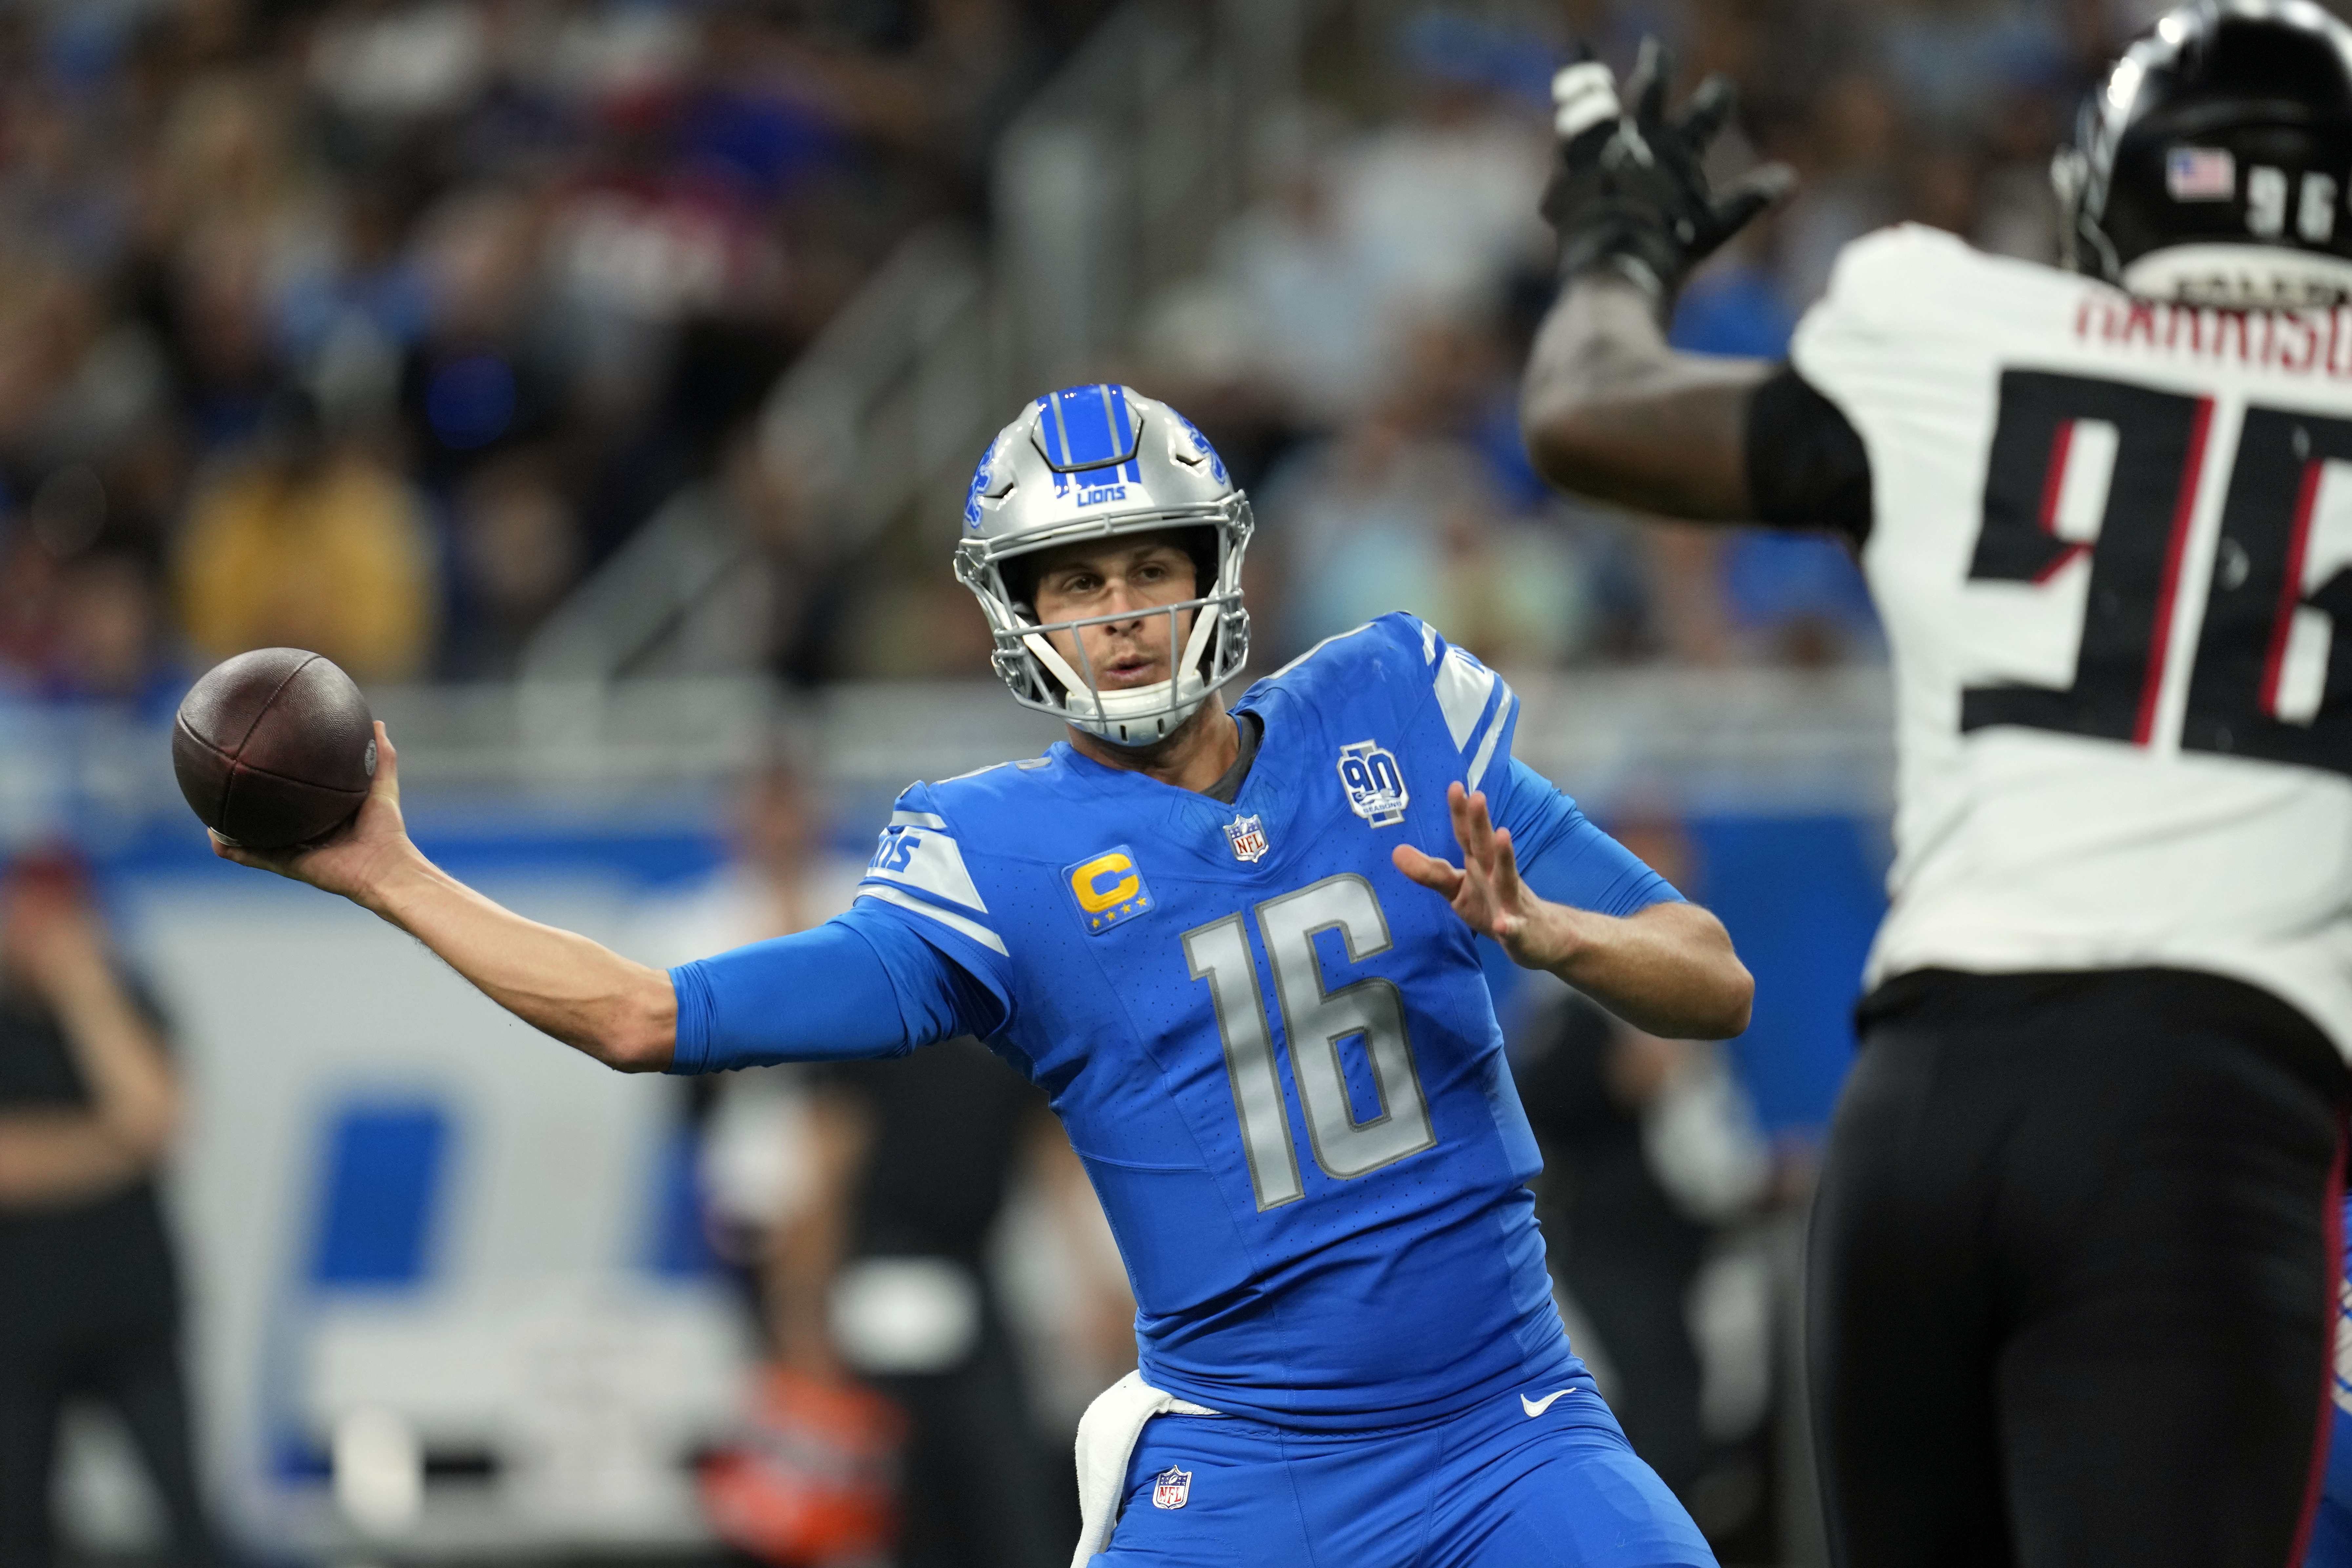 Jared Goff throws and runs for TDs, helping the Lions bounce back with a  20-6 win over Falcons